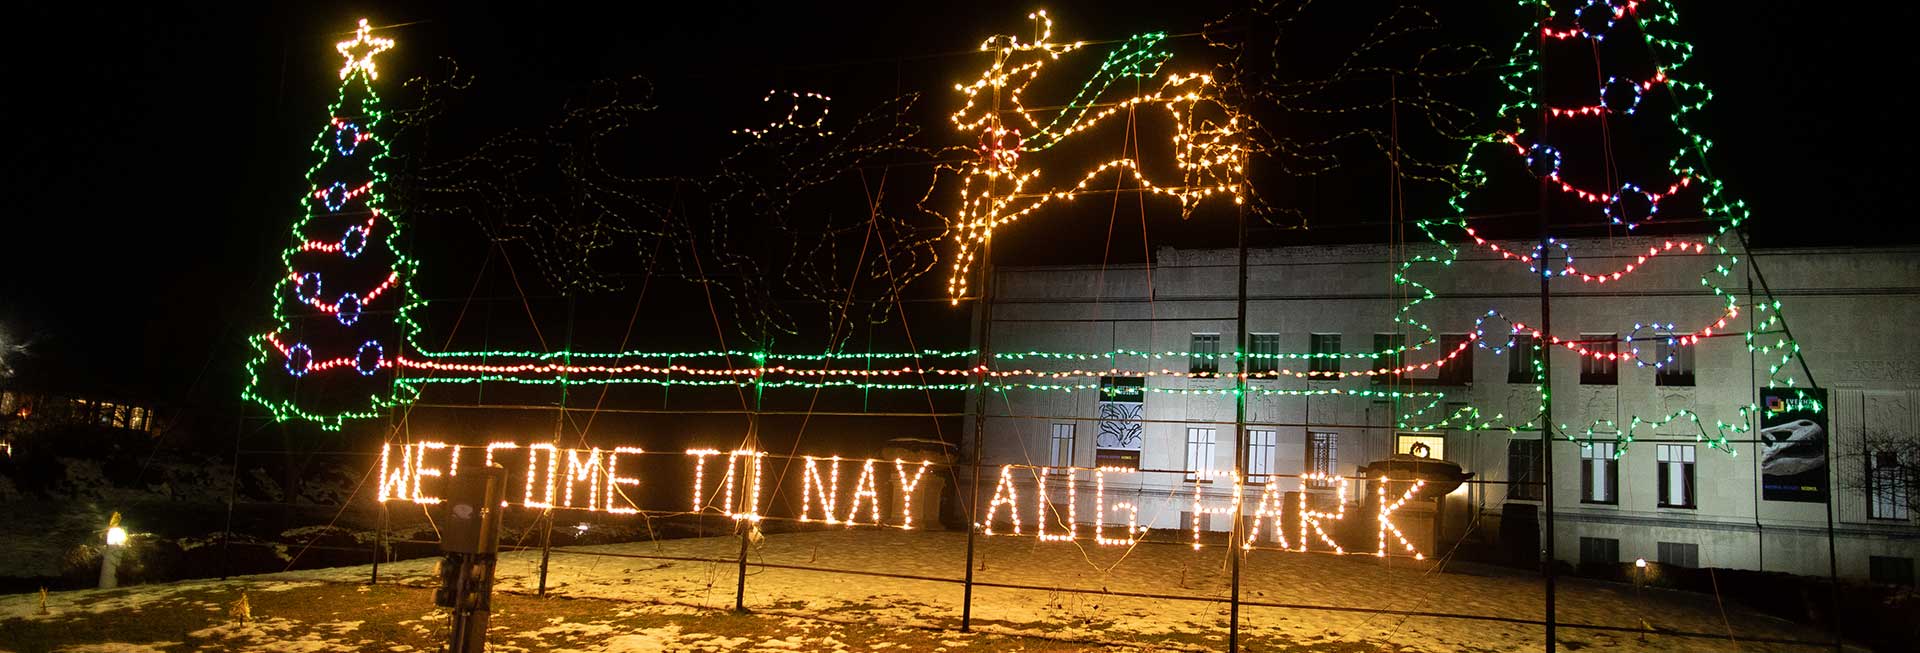 Holiday Light Spectacular at Nay Aug Park visitPA